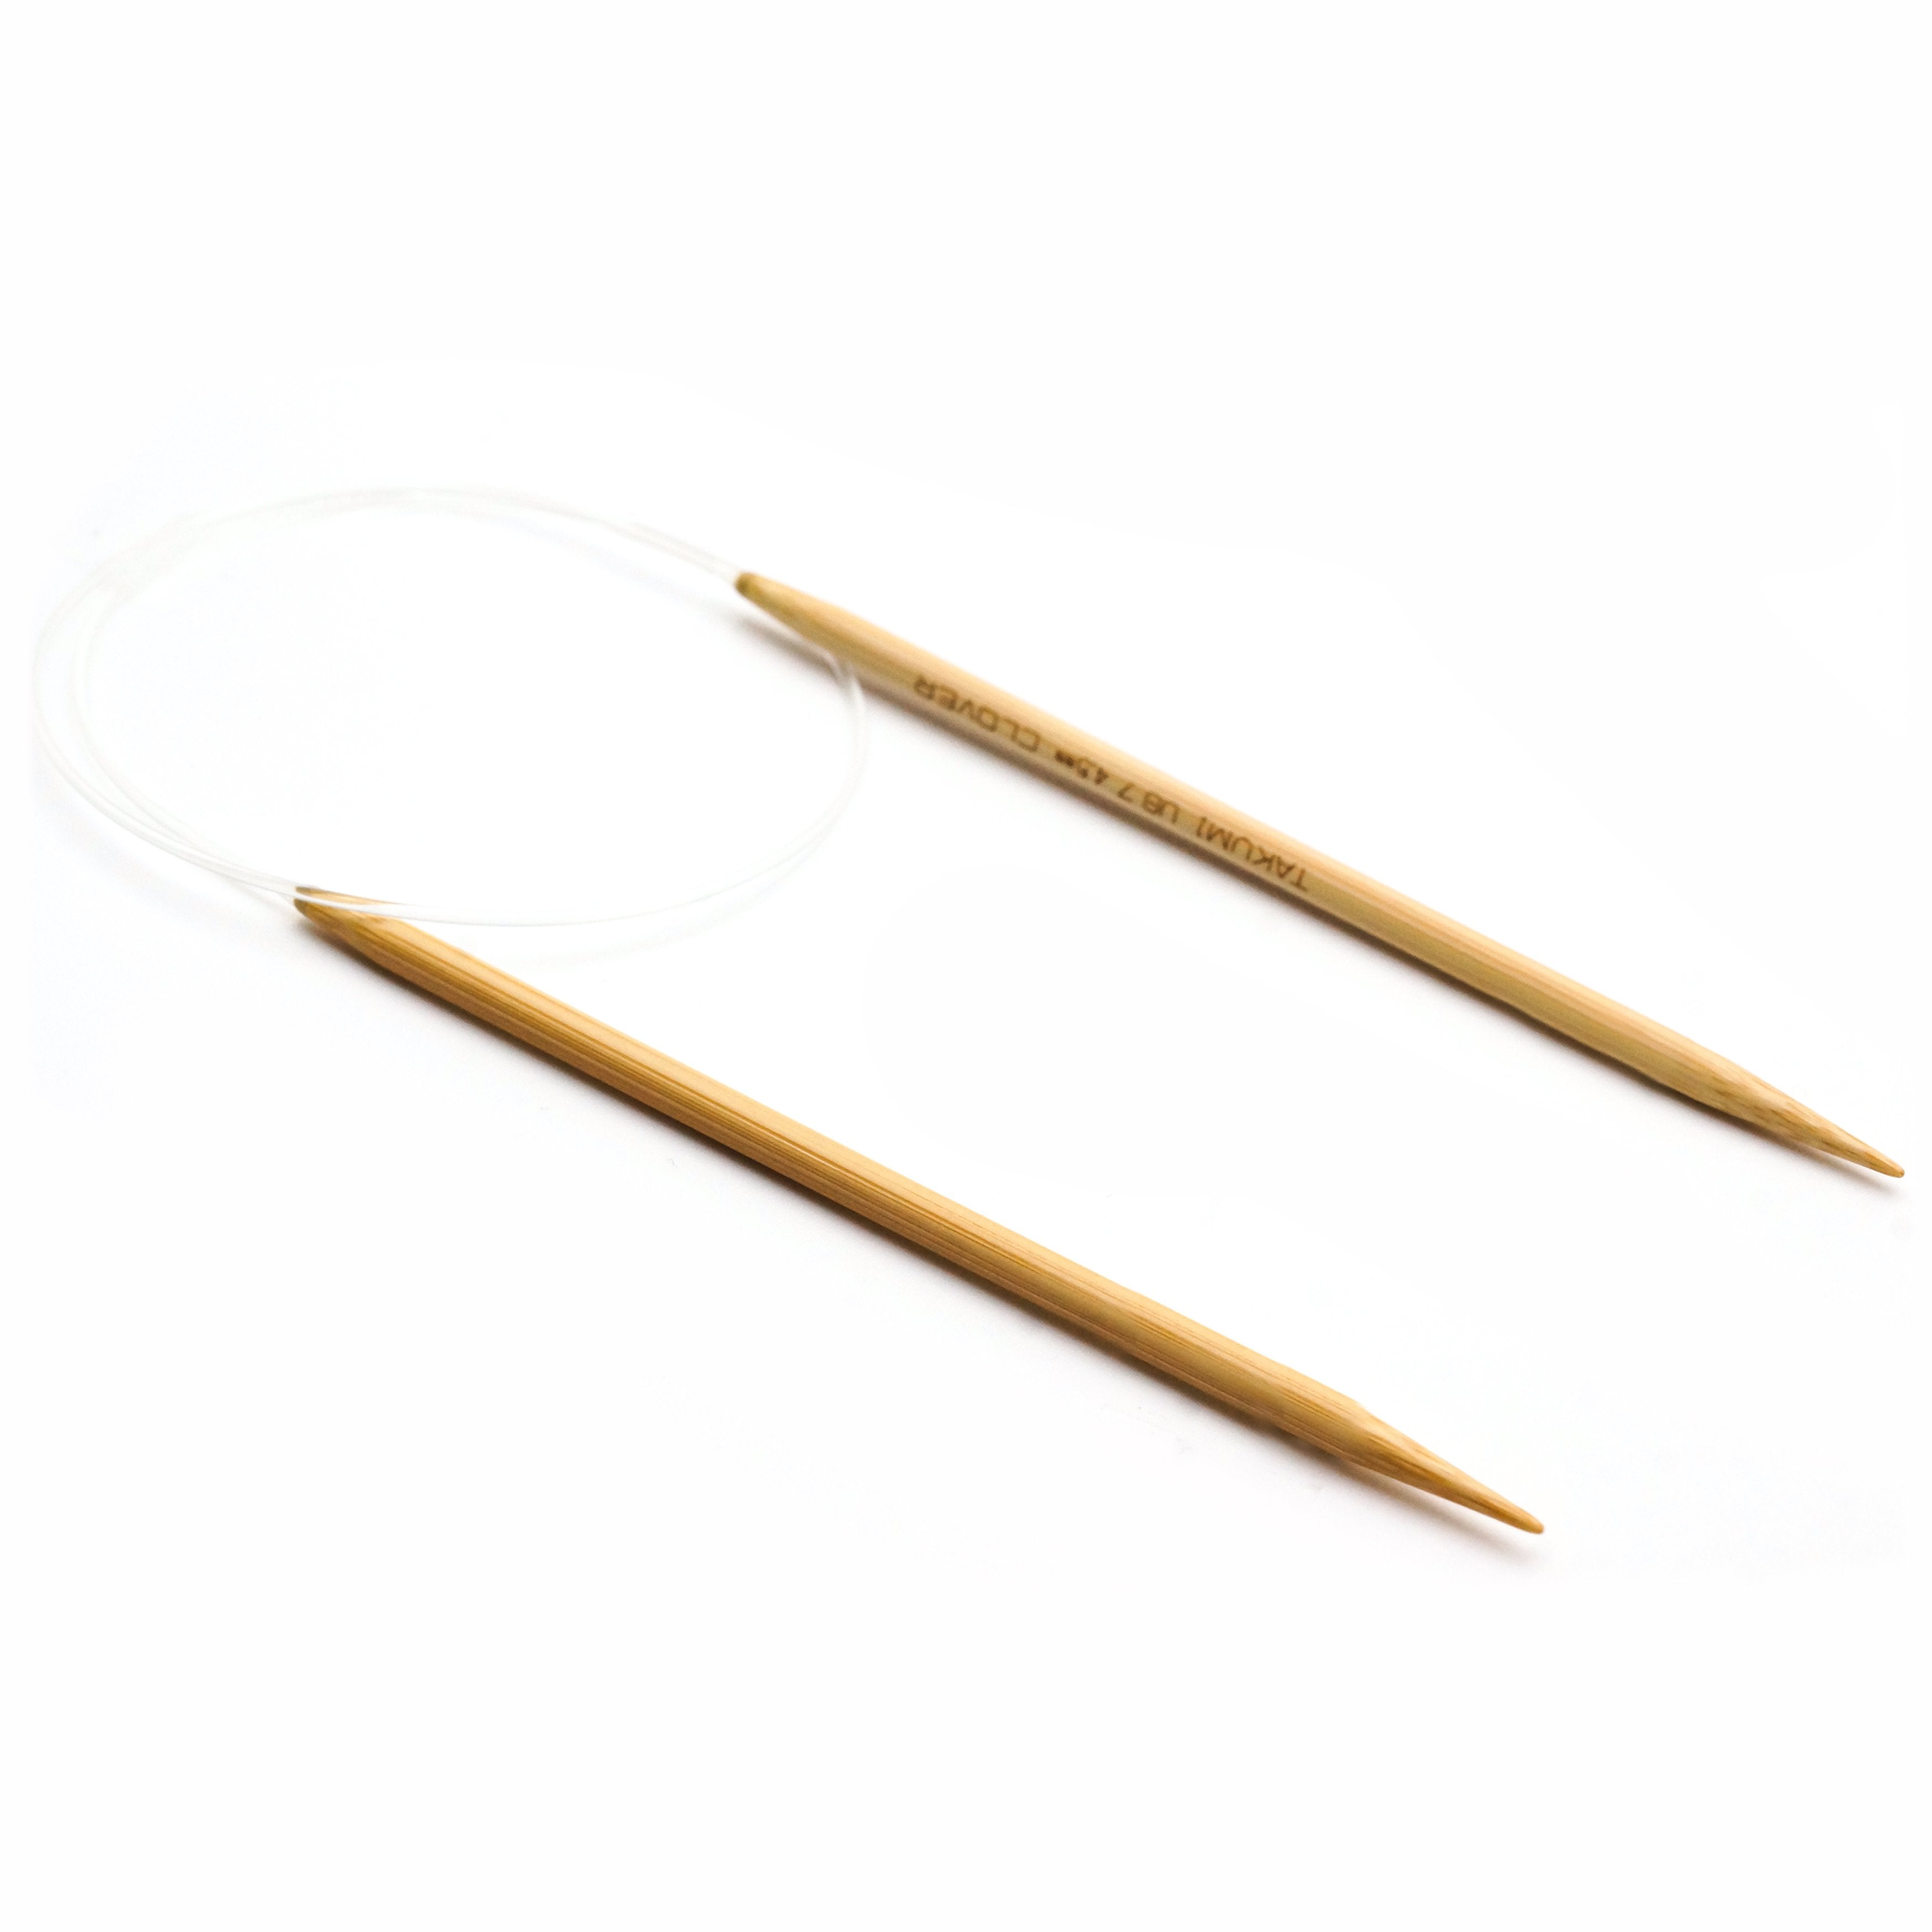 Bamboo Knitting Needles 4 mm, 5 mm, 6 mm, 7 mm, 8 mm – CRAFT BOUTIQUE